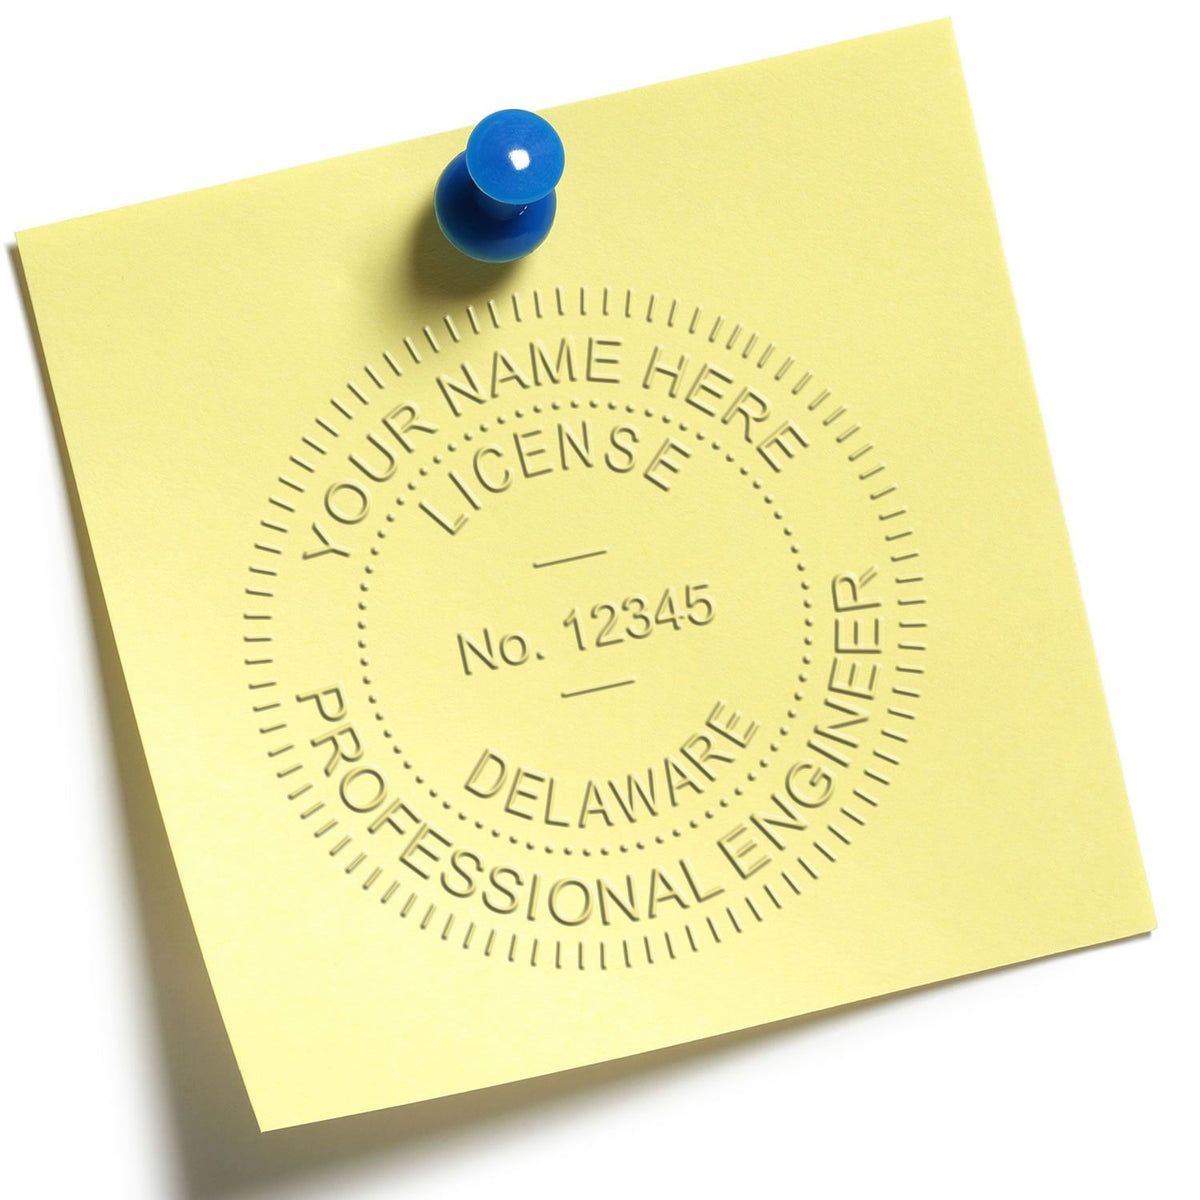 This paper is stamped with a sample imprint of the Delaware Engineer Desk Seal, signifying its quality and reliability.